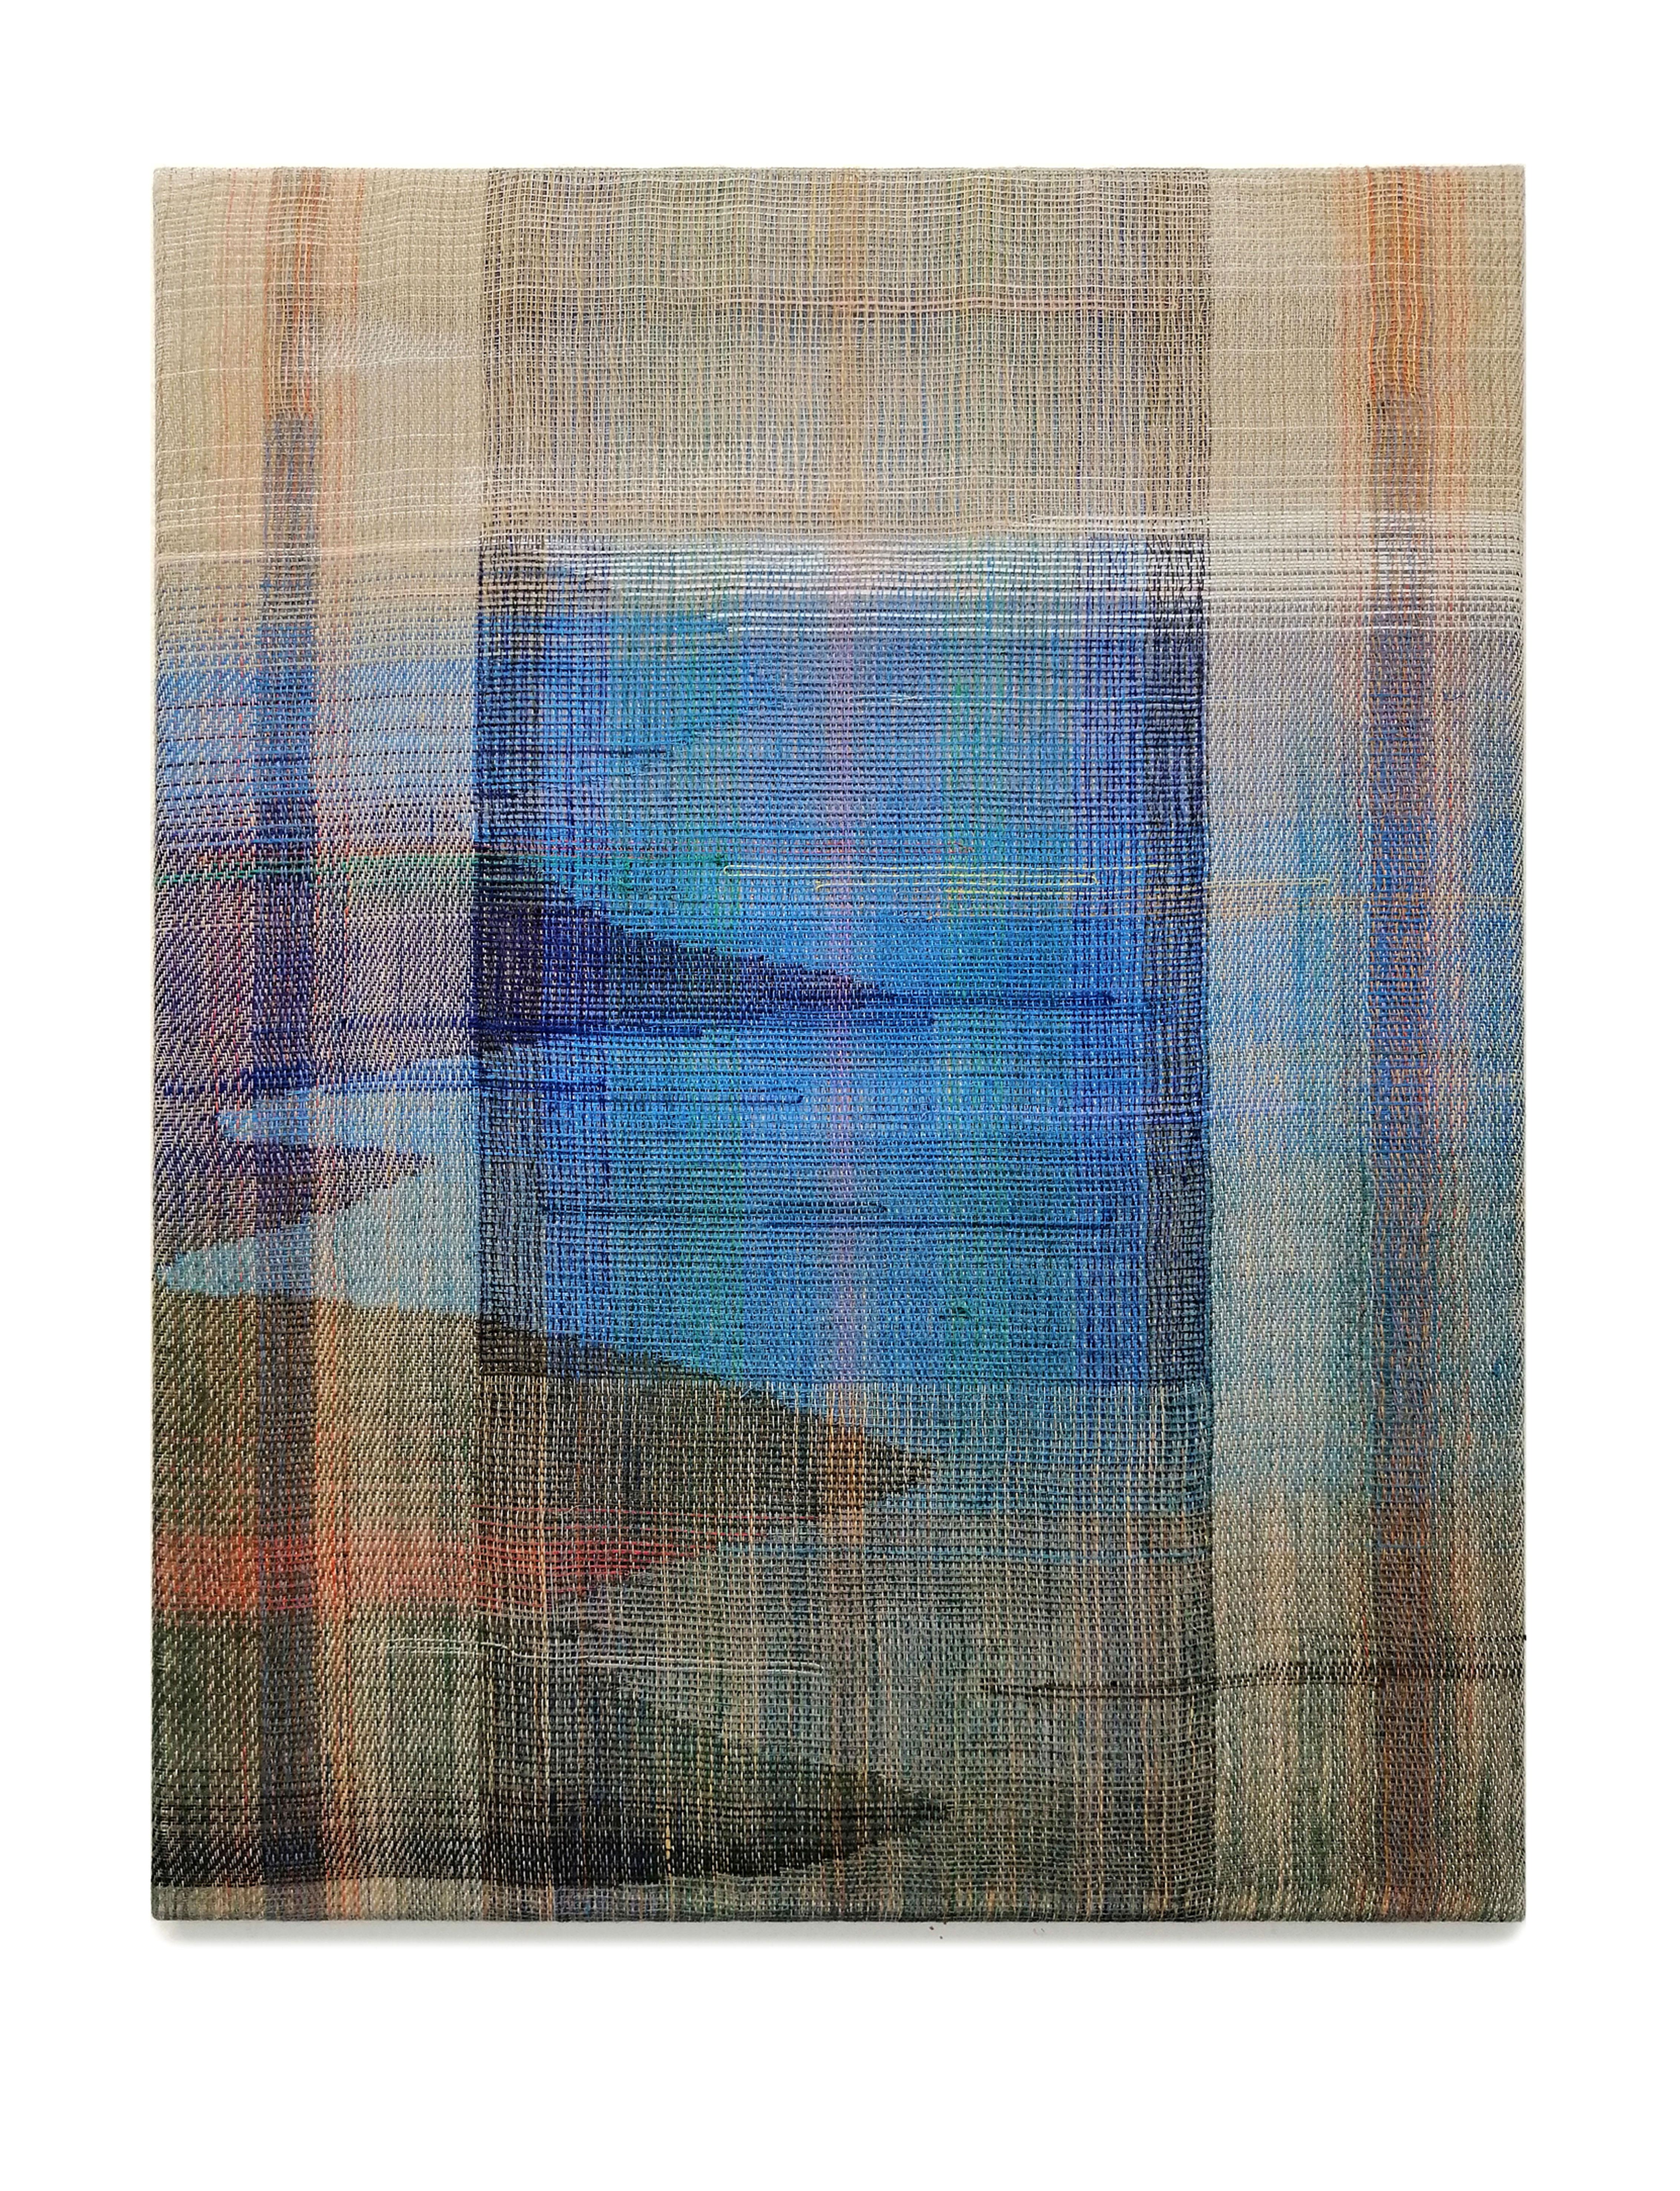 Marta Pokojowczyk Landscape Painting - In Between Words 2 - Abstract Landscape, Contemporary Woven and Painted Artwork